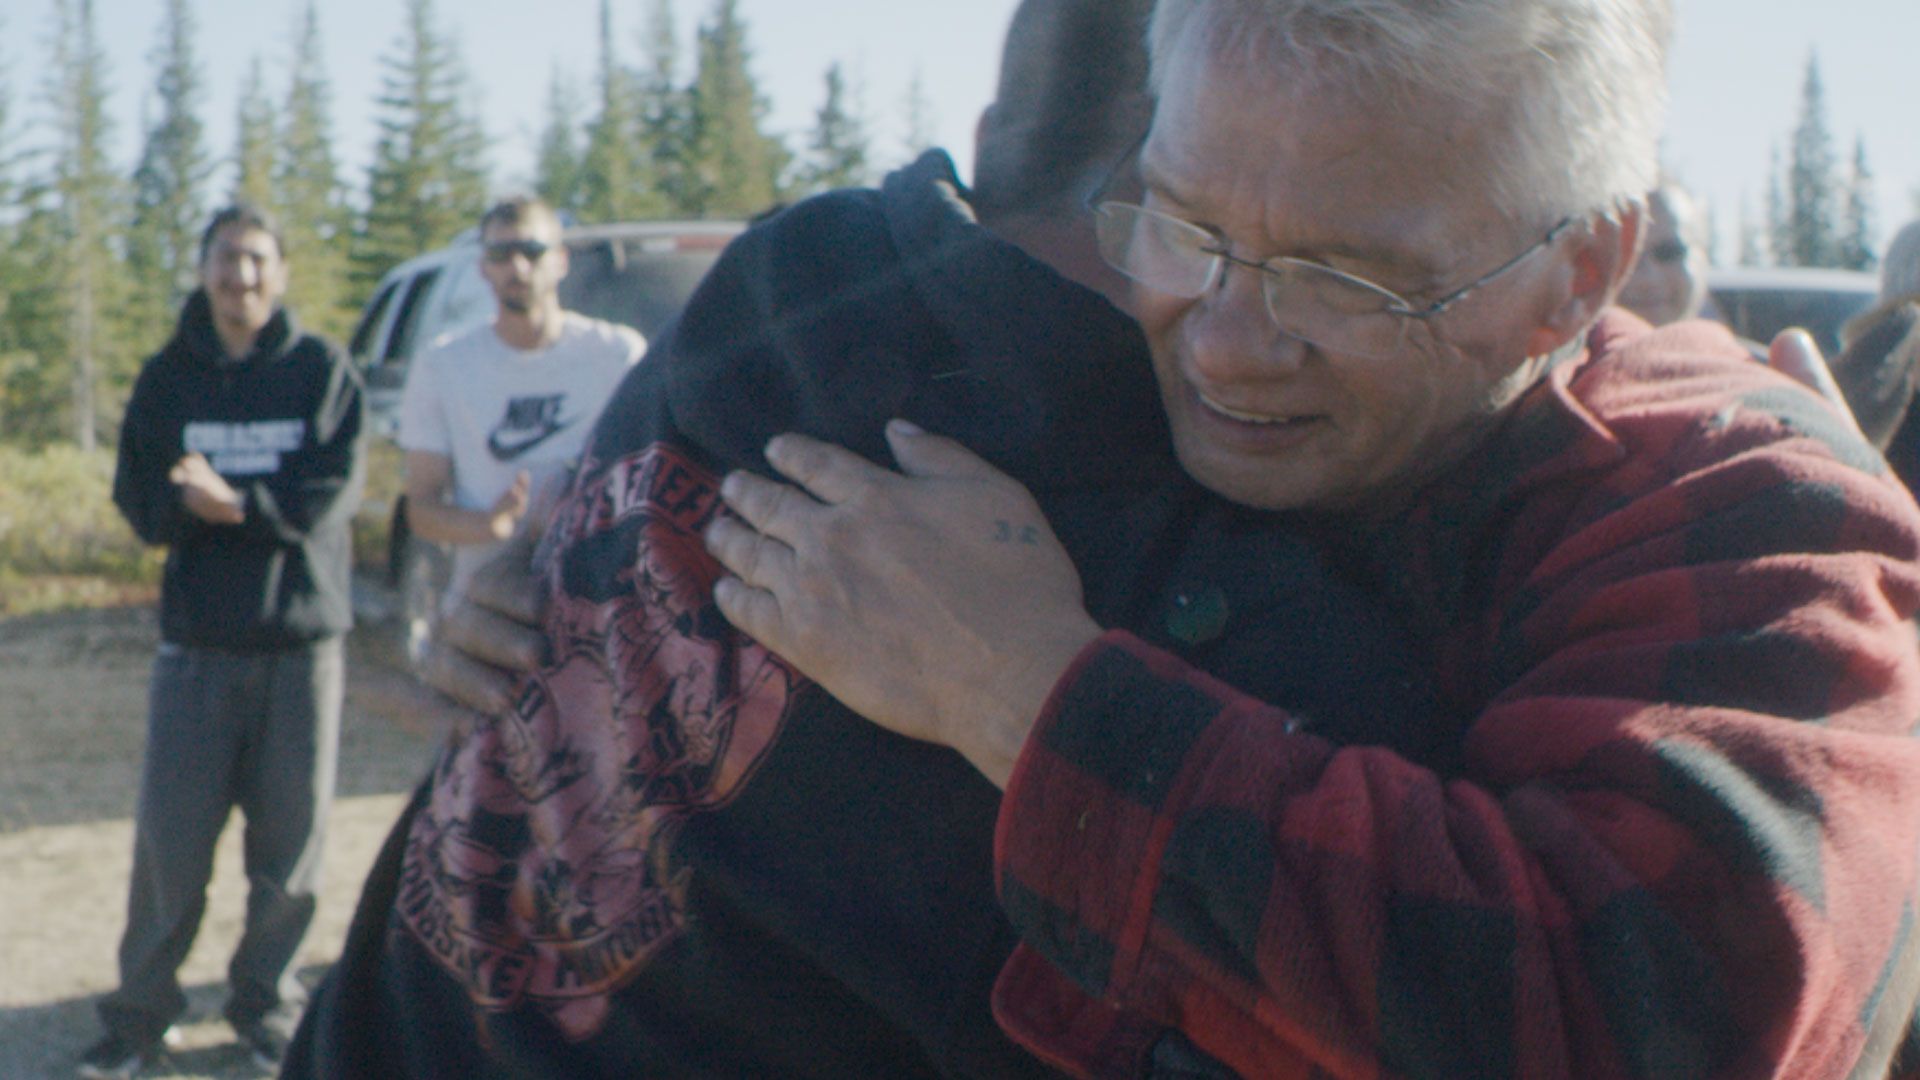 Still from a video showing two Indigenous people embracing.